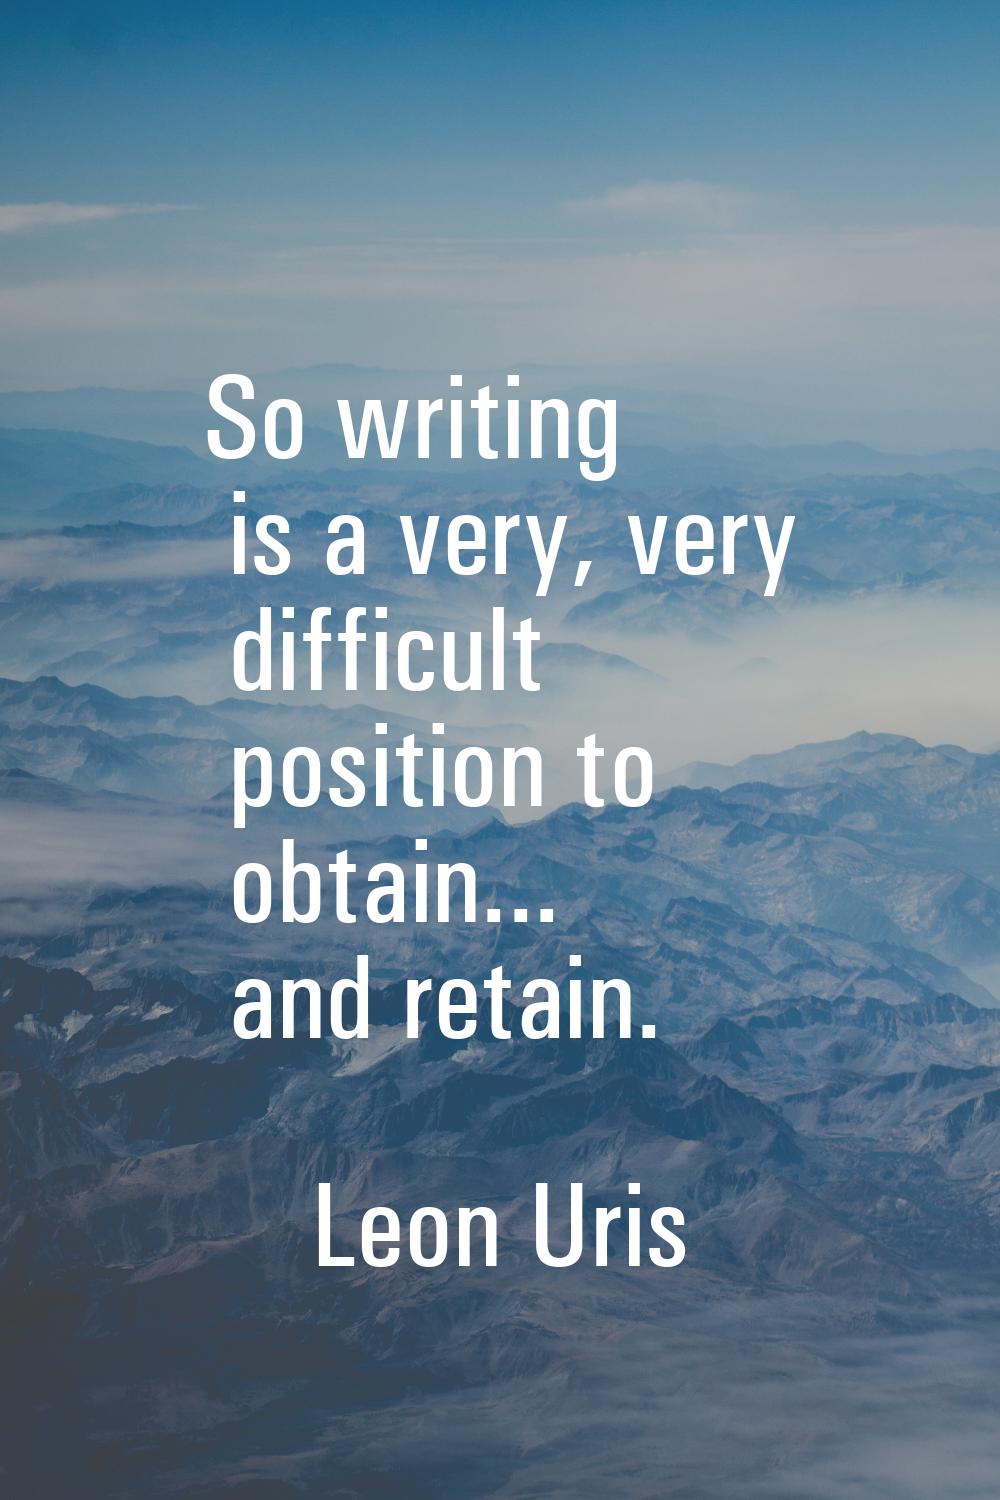 So writing is a very, very difficult position to obtain... and retain.